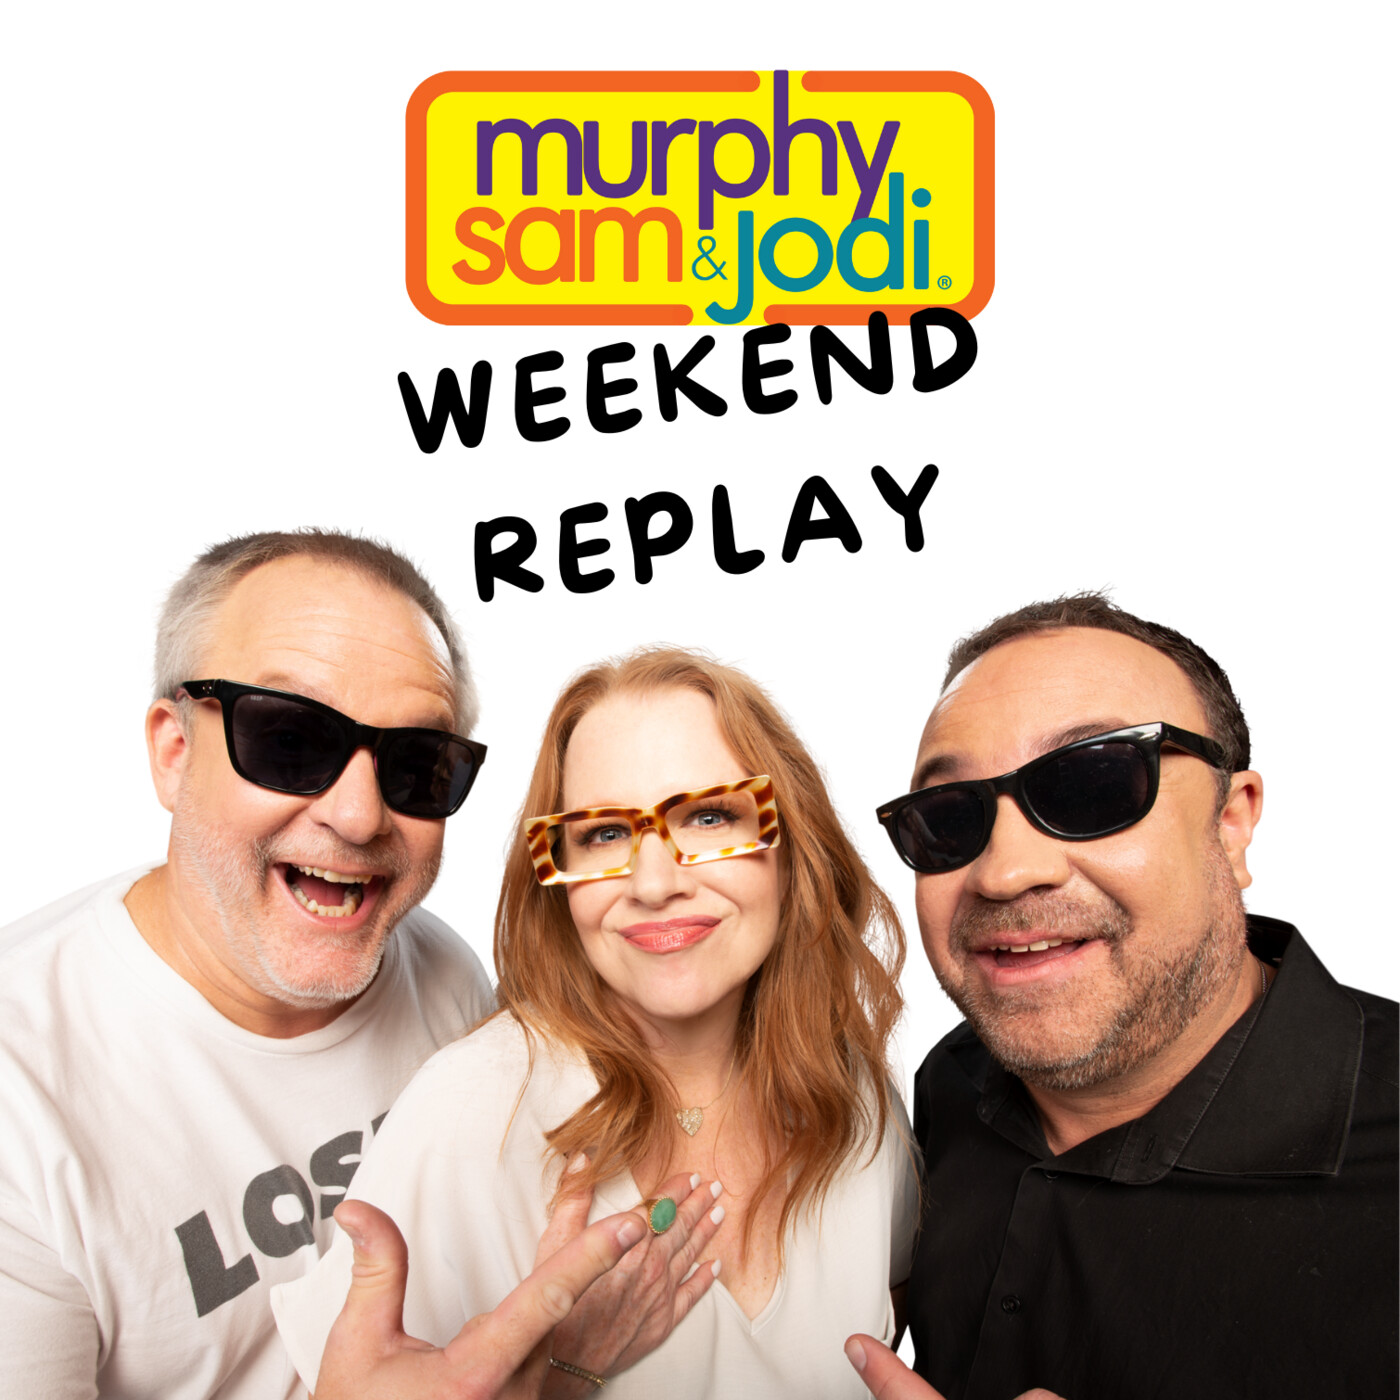 The Weekend Replay PODCAST: What Murphy & Jodi won't say to each other / Does a full moon affect your behavior? / AI at the drive thru